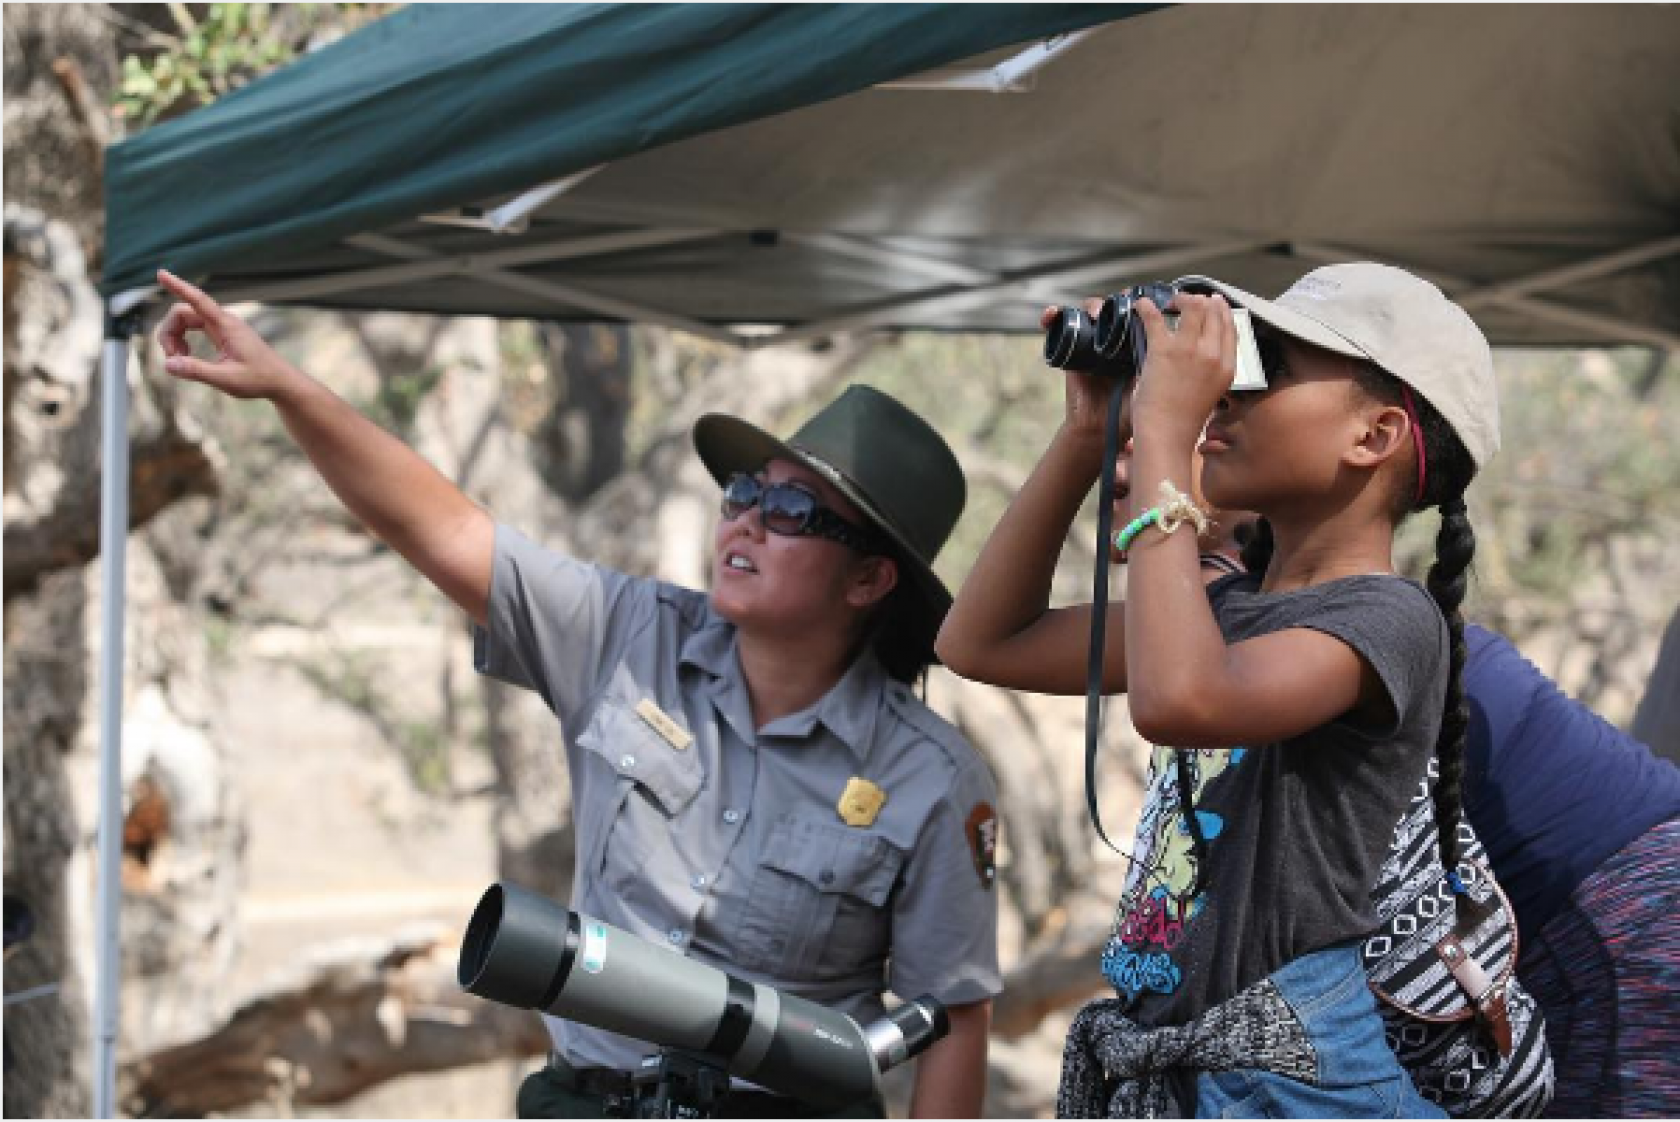 Park ranger pointing to sky while child looks through binoculars 